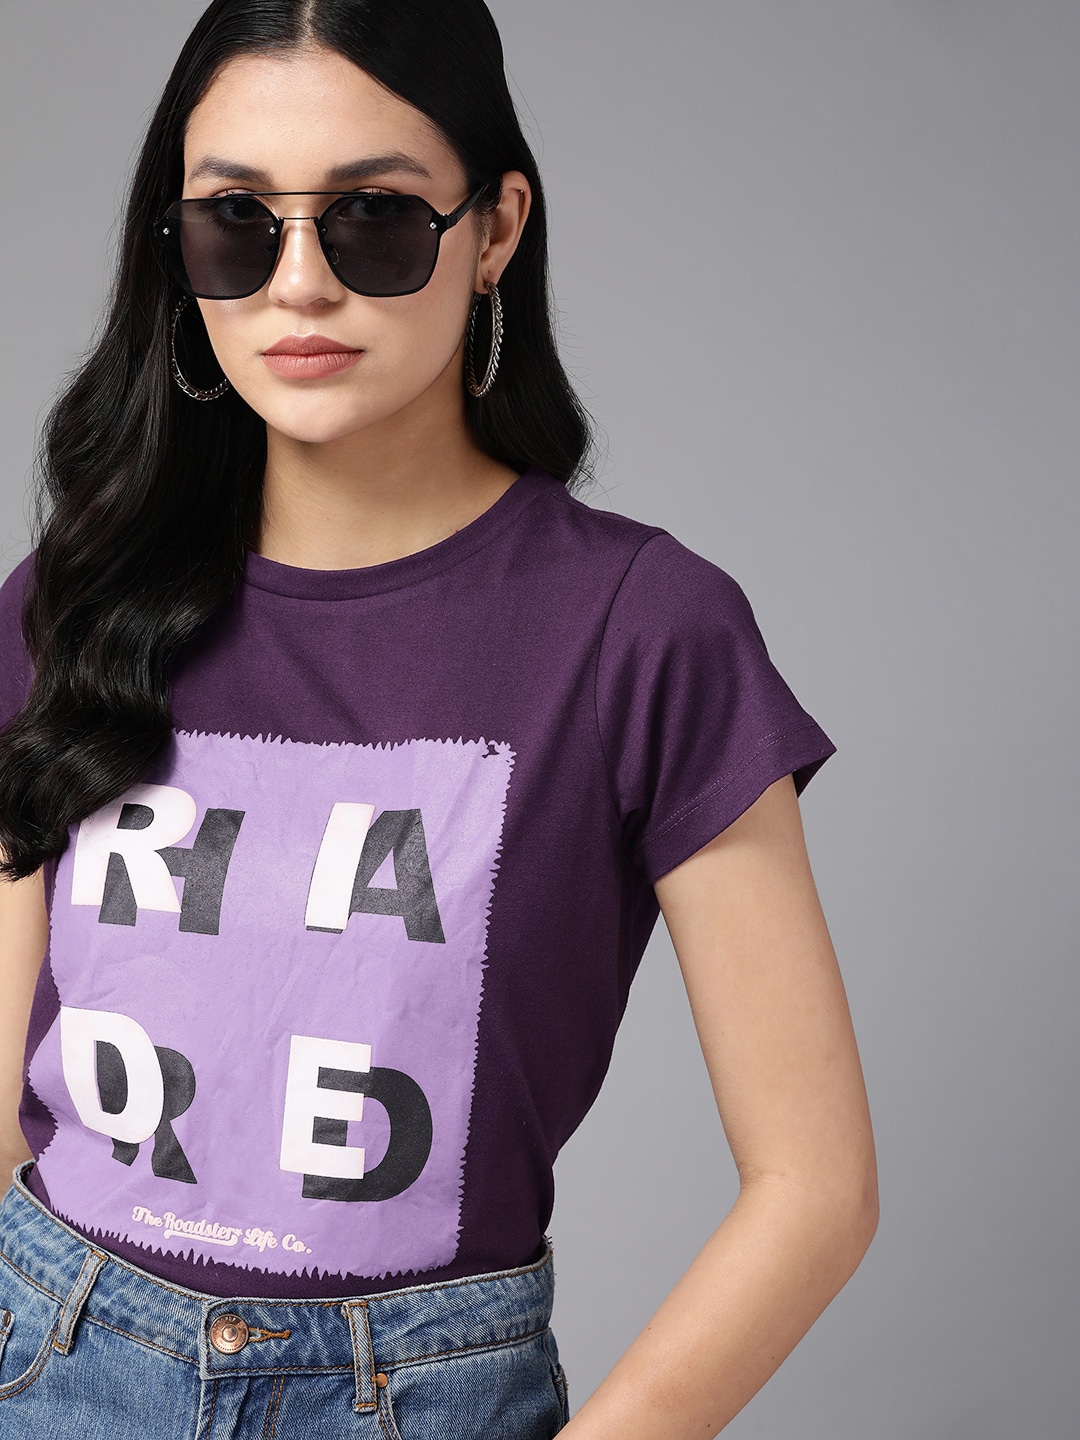 Roadster Purple Printed Top Price in India